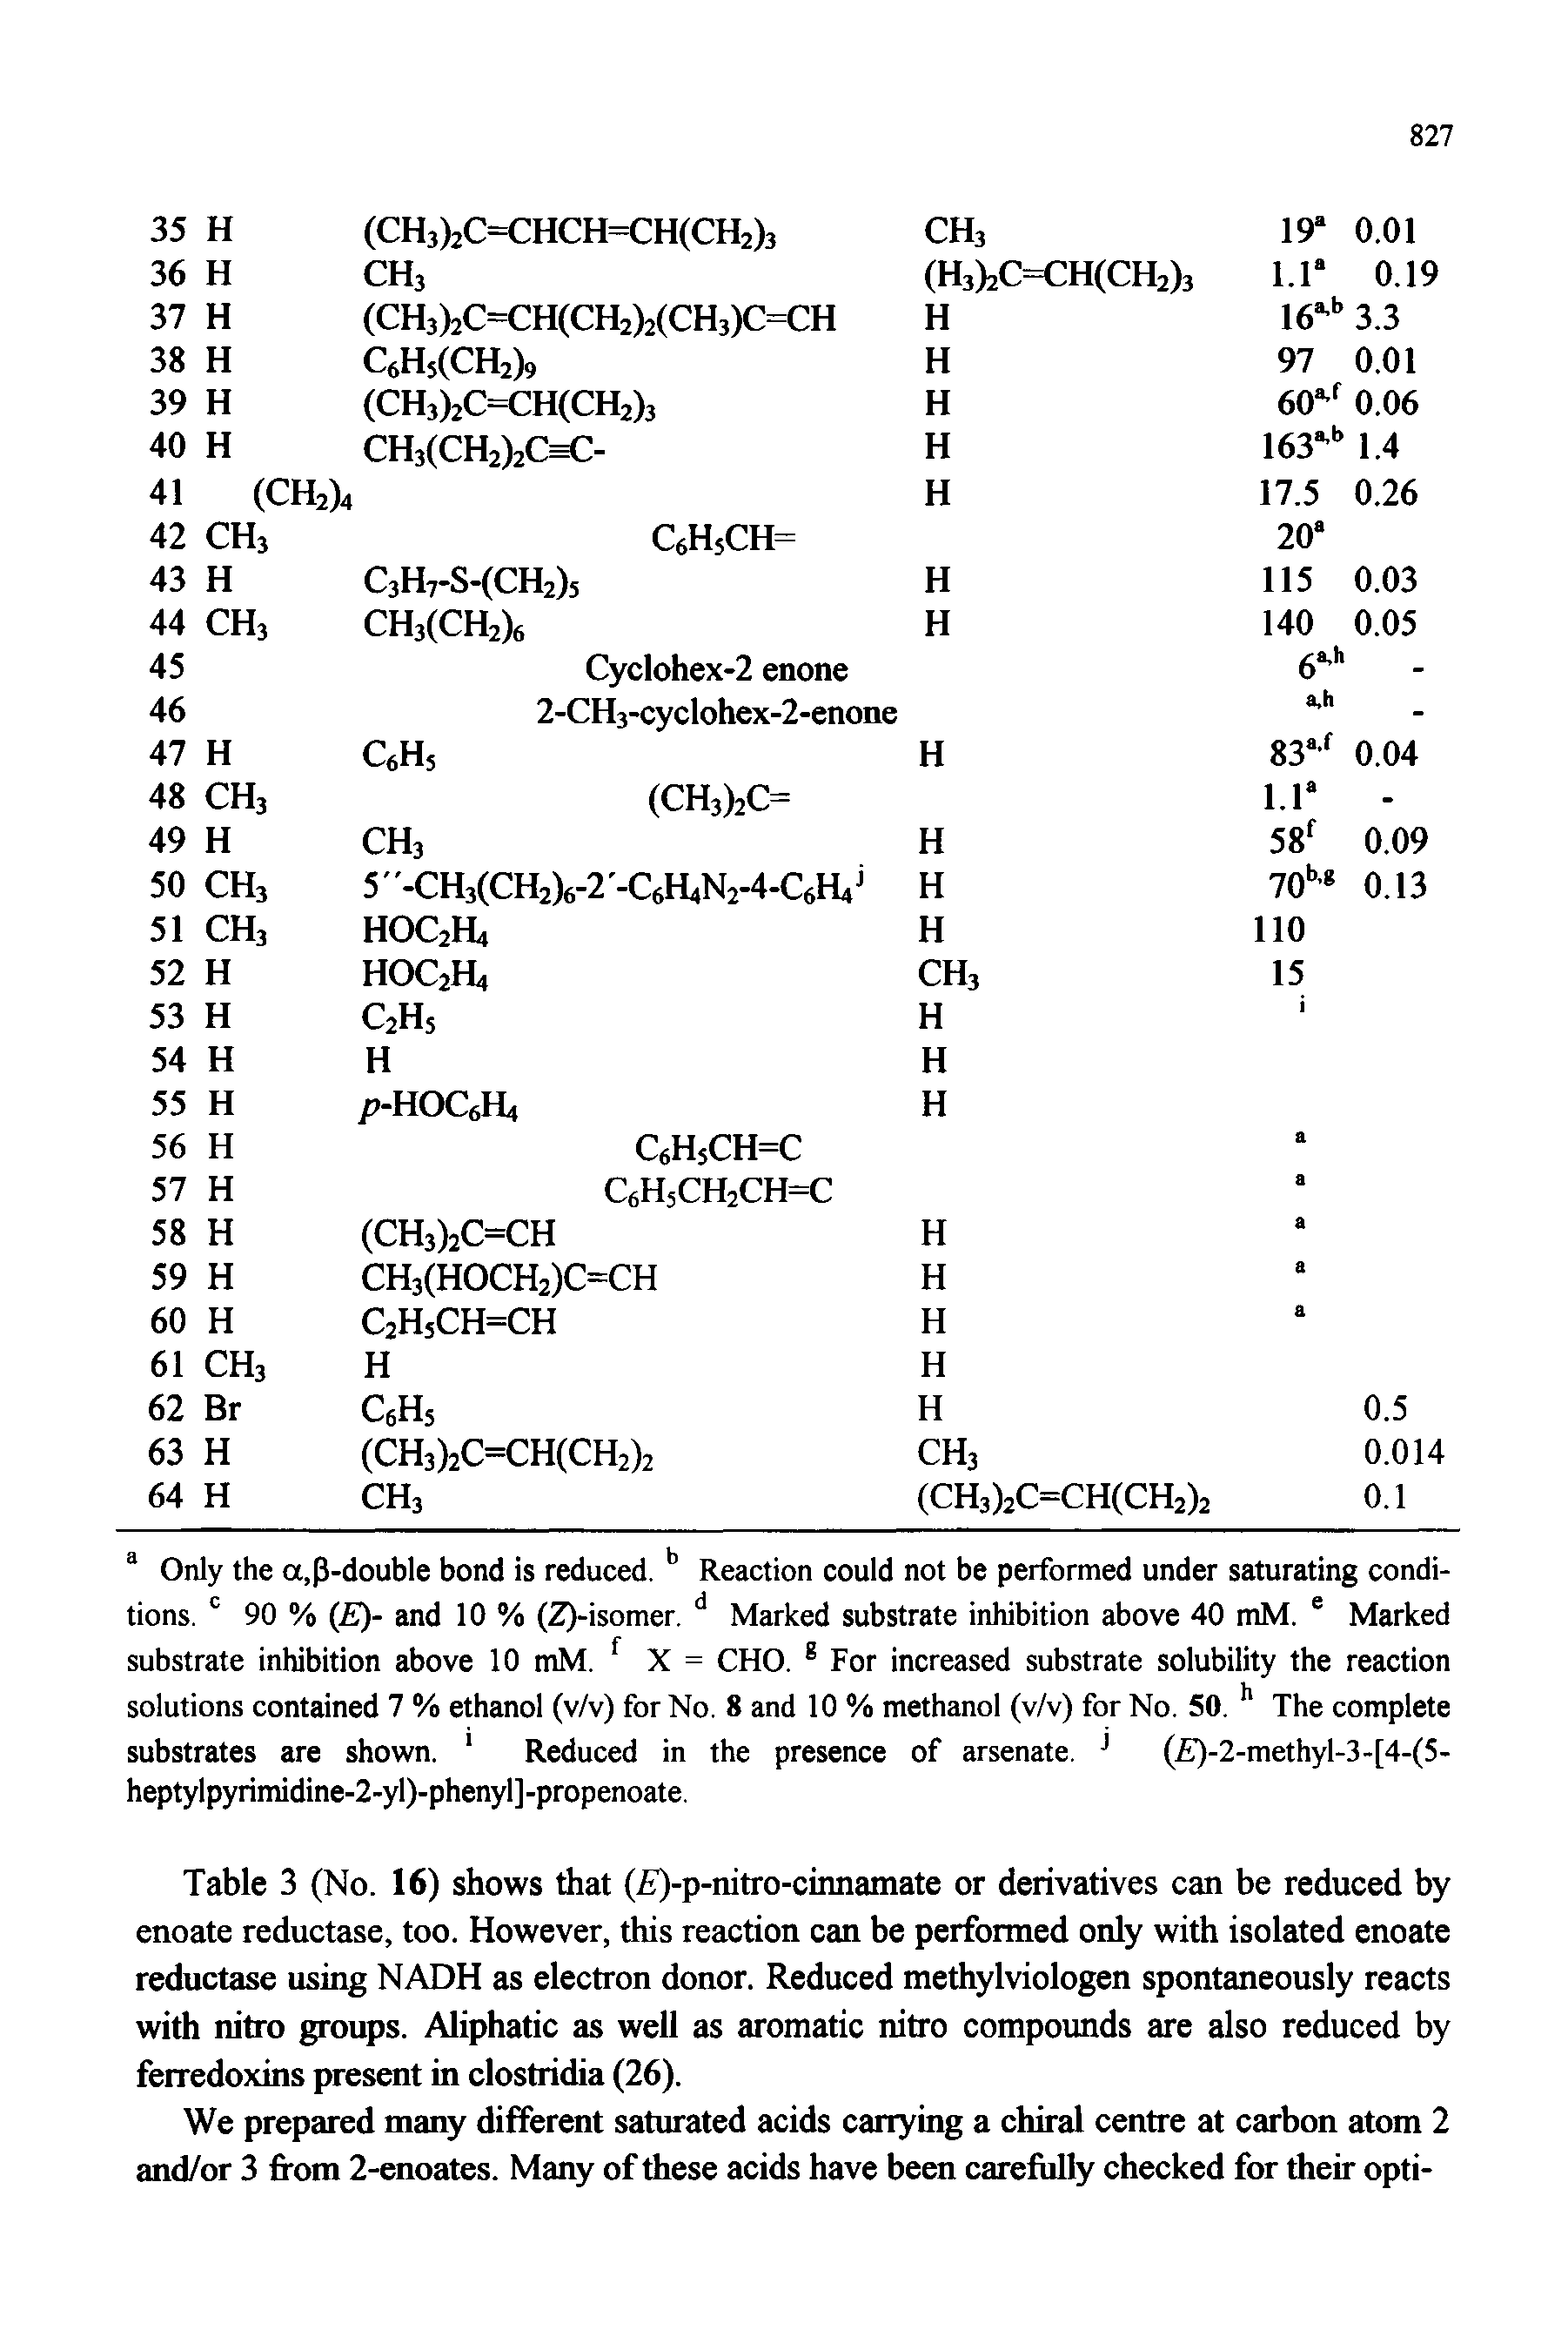 Table 3 (No. 16) shows that ( )-p-nitro-cmnamate or derivatives can be reduced by enoate reductase, too. However, this reaction can be performed only with isolated enoate reductase using NADH as electron donor. Reduced methylviologen spontaneously reacts with nitro groups. Aliphatic as well as aromatic nitro compounds are also reduced by ferredoxins present in clostridia (26).